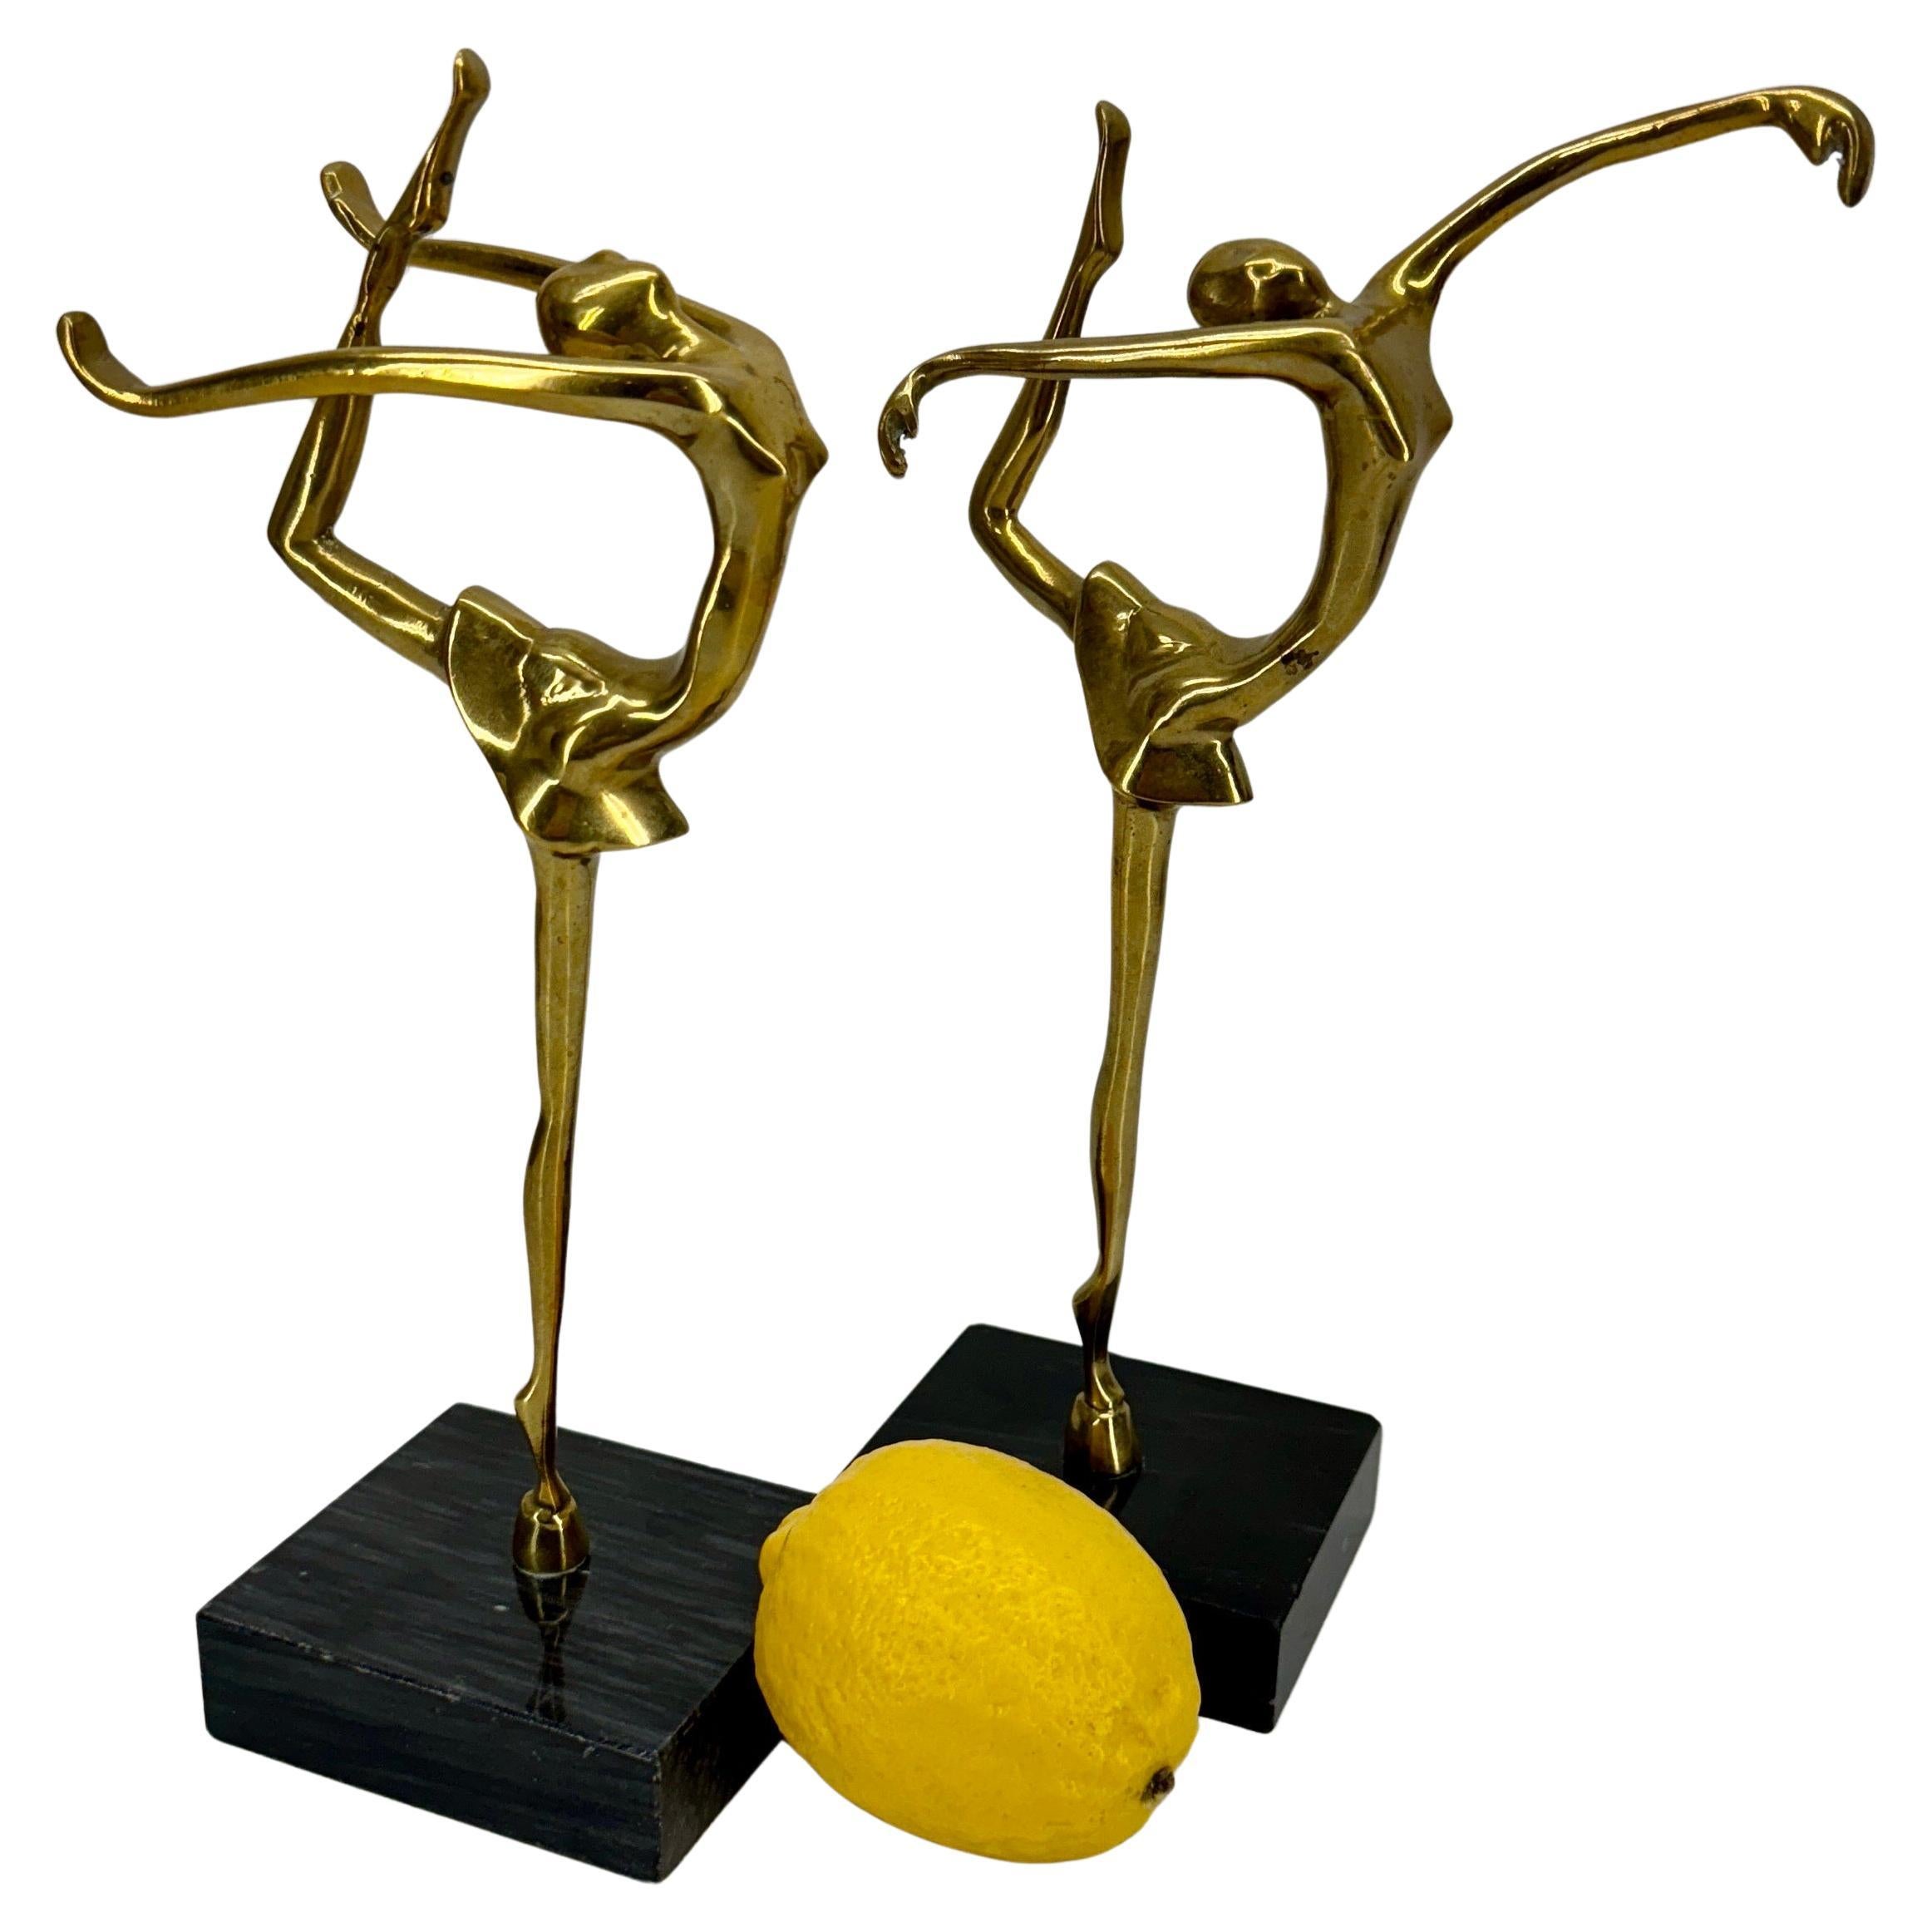 Brass Women Figures Dancing, A Pair, Circa 1960's

Charming pair of dancing ballarinas set on top of marble bases. Certainly makes a gorgeous statement in an open bookcase or decorative objects set on a table around the home or office. Wonderful set